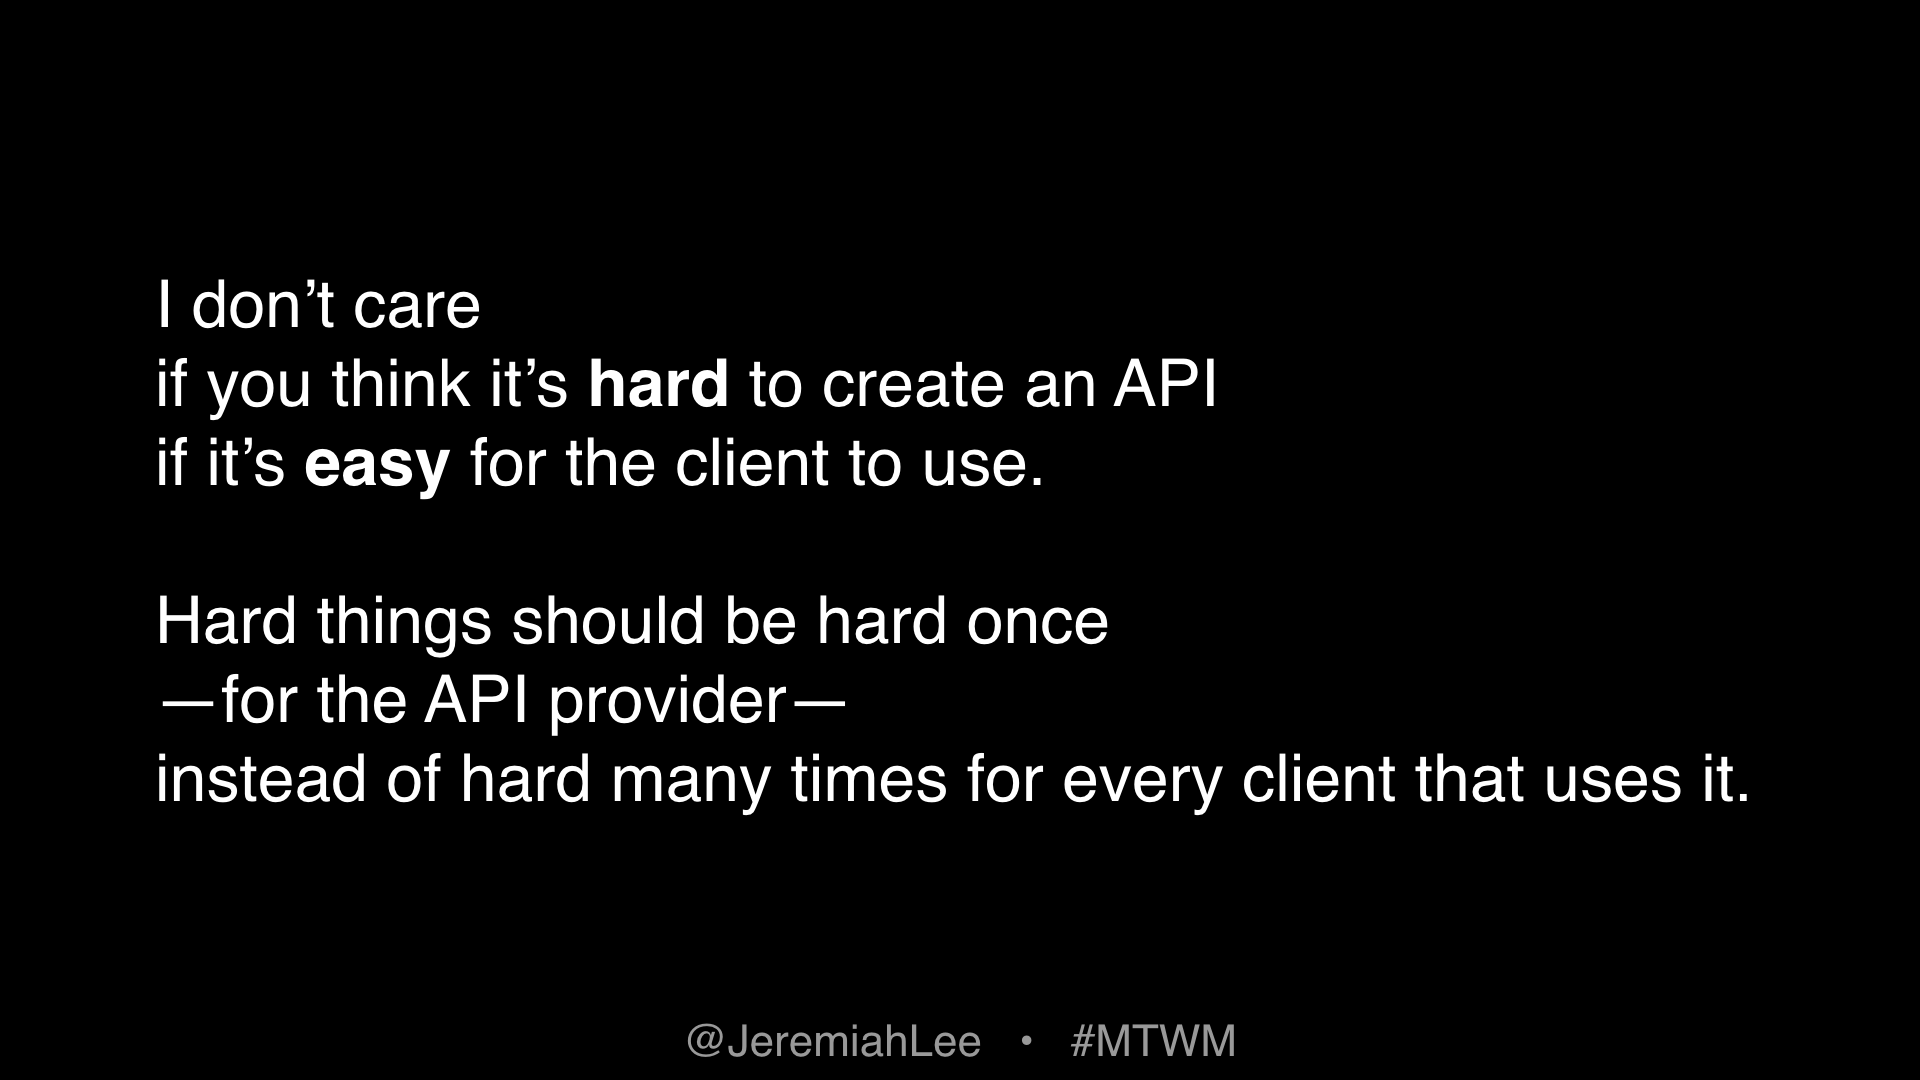 Text: I don’t care if you think it’s hard to create an API if it’s easy for the client to use. Hard things should be hard once—for the API provider—instead of hard many times for every client that uses it.